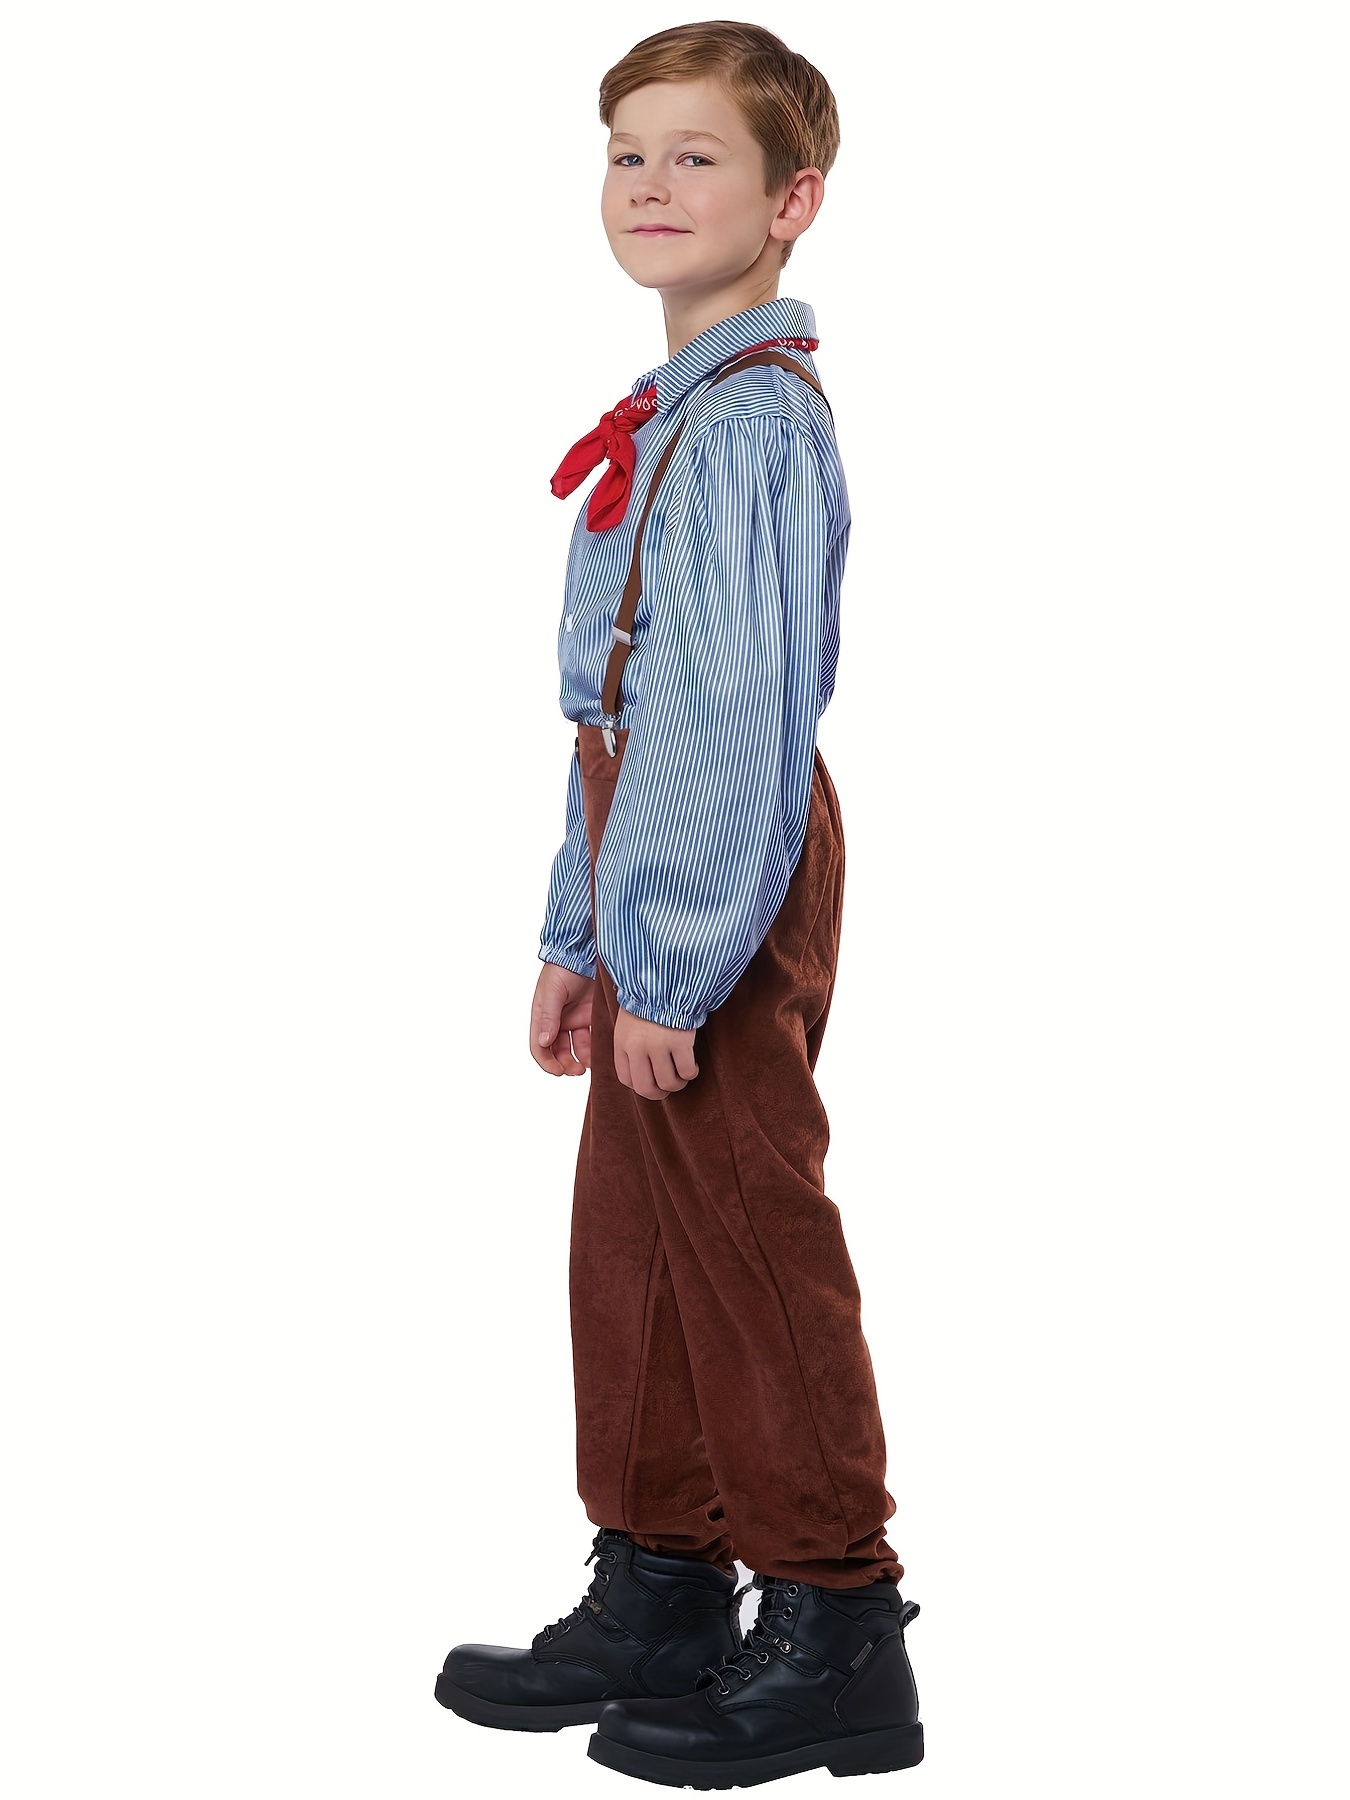 Cowboy Costume for Kids,Boys Halloween Party Dress Up,Role Play and